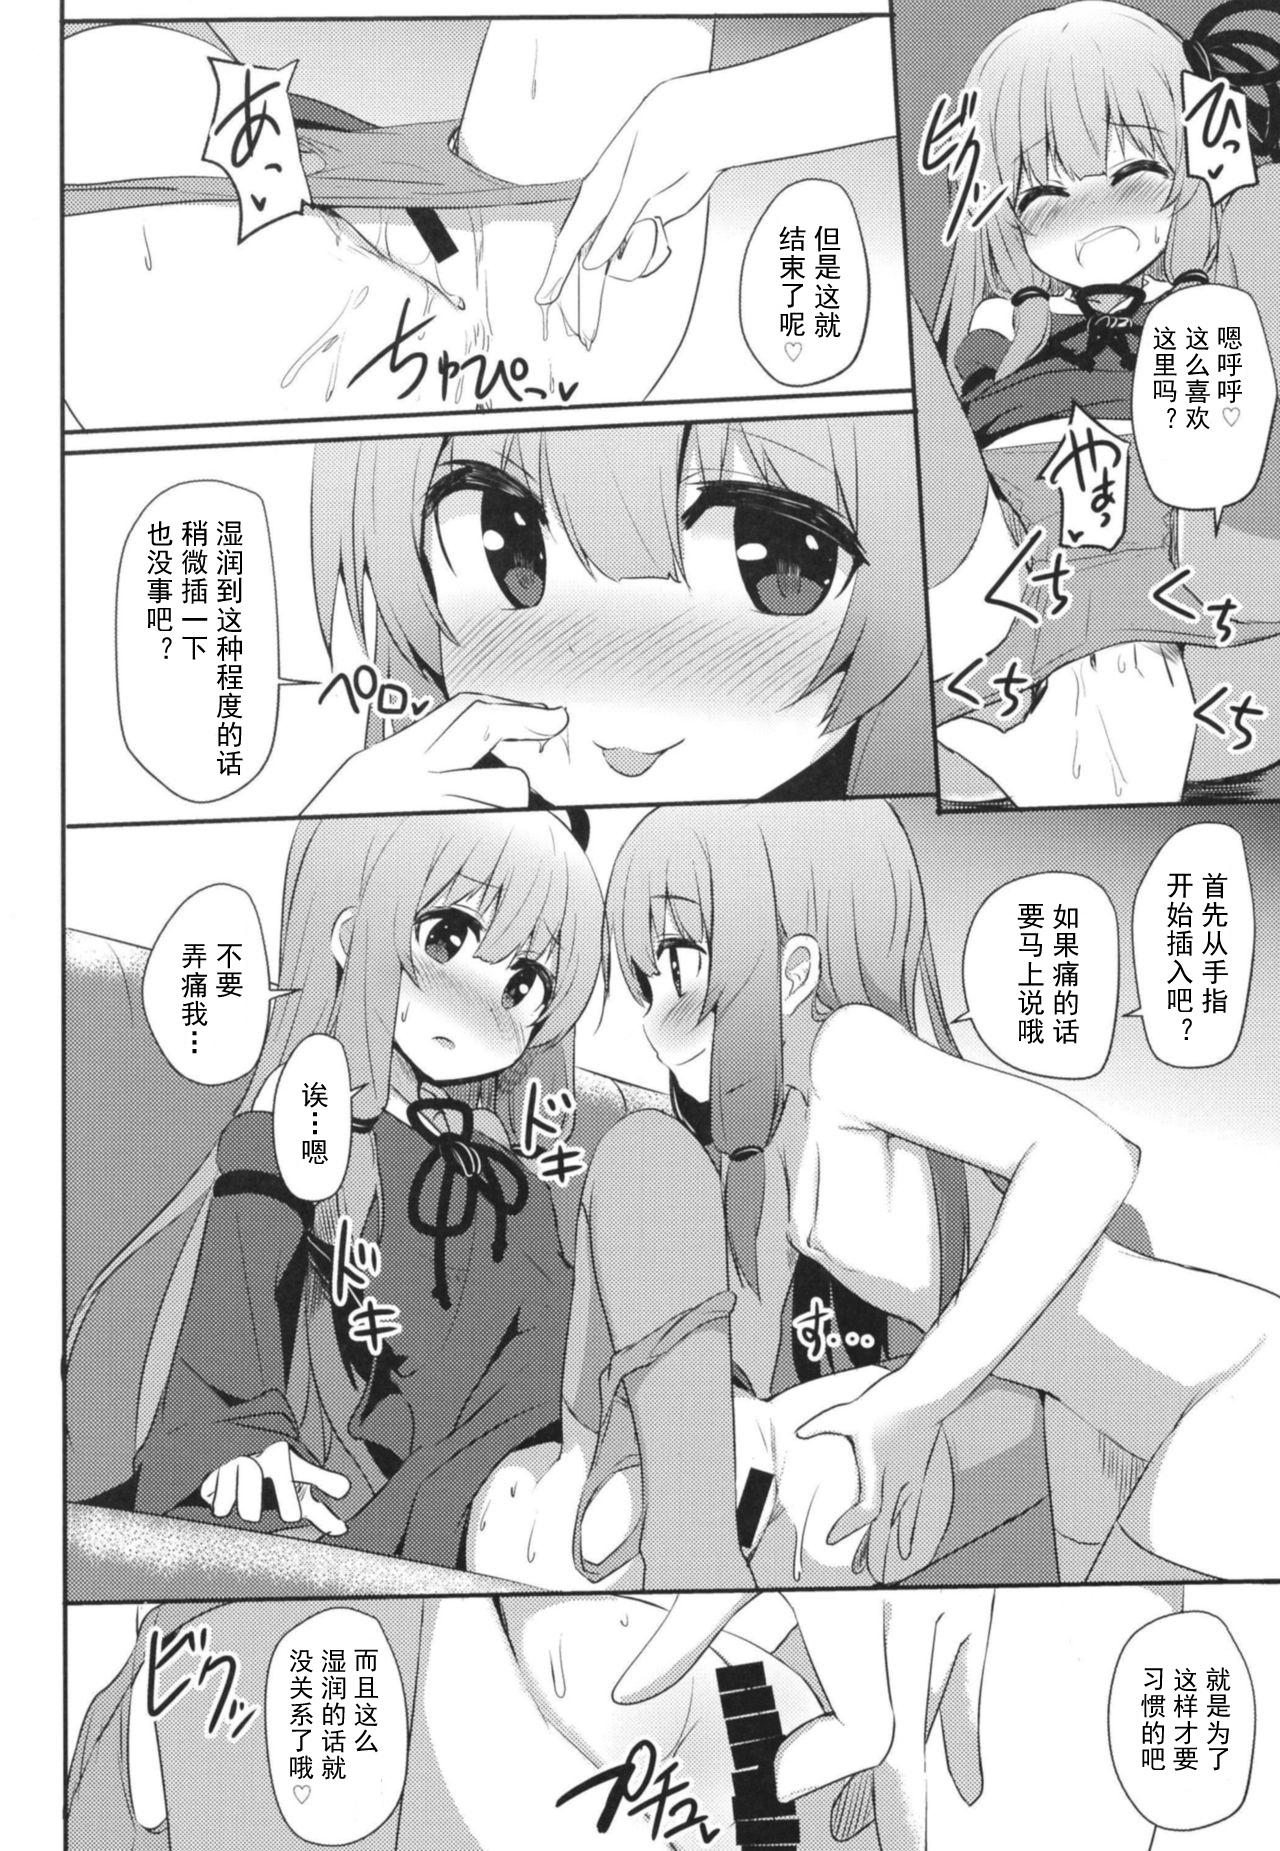 Selfie [Milk Pudding (Jamcy)] Akane-chan Challenge! 4-kaime (VOICEROID) [Chinese] [古早个人汉化] [Digital] - Voiceroid Loira - Page 6